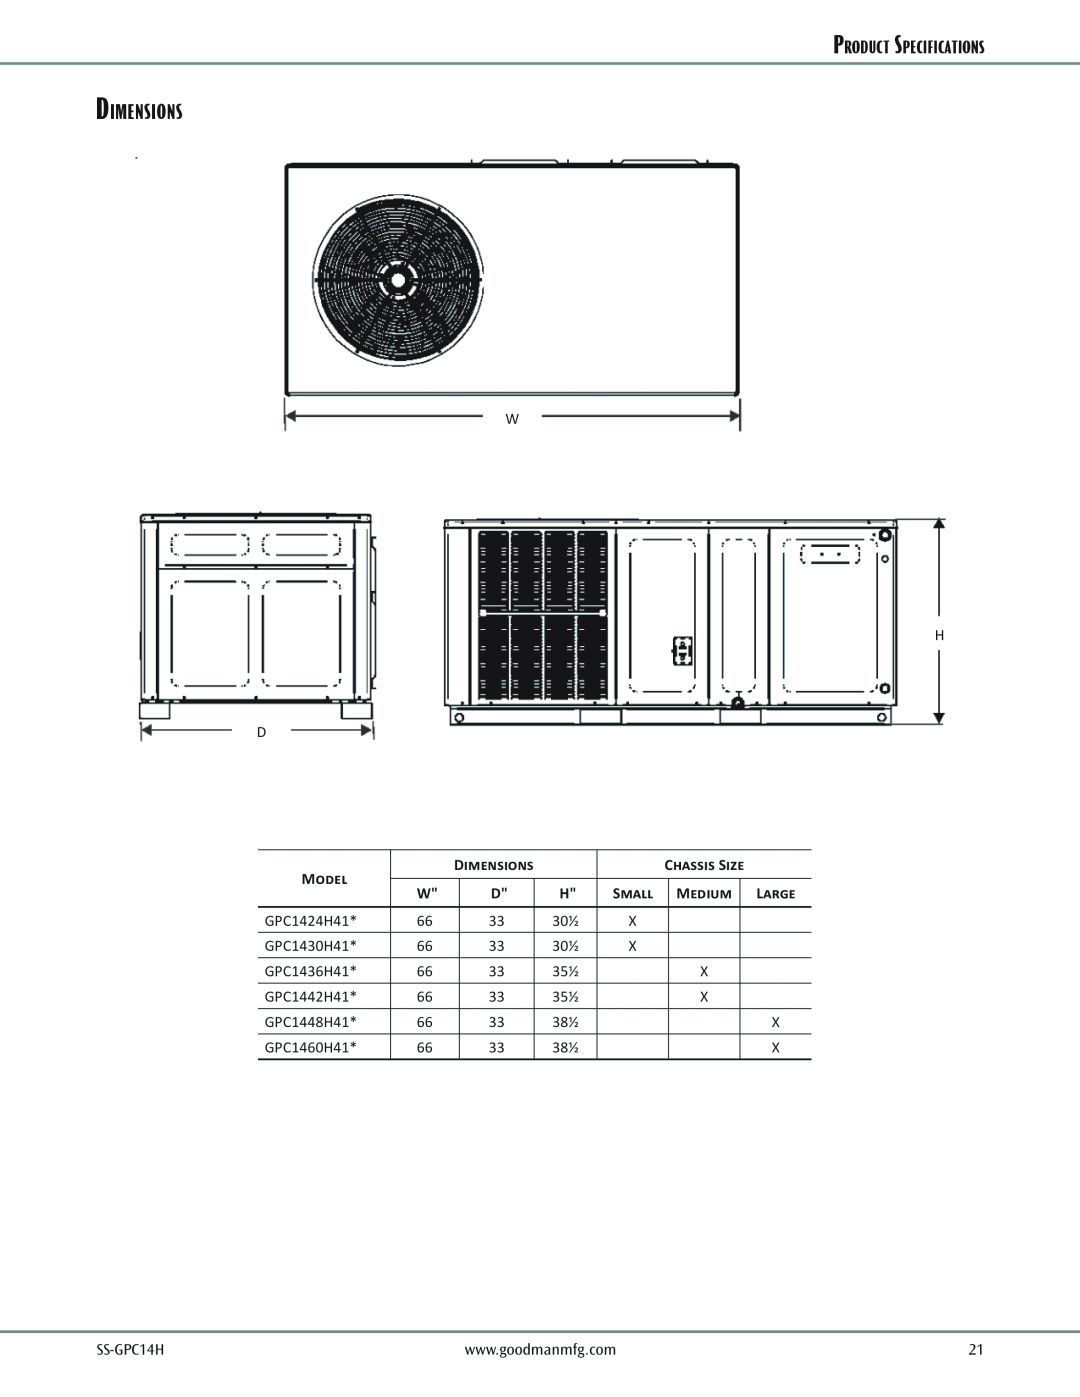 Goodman Mfg 2- to 5-Tone Packaged Air Conditioner Dimensions, Product Specifications, Model, Chassis Size, Small, Medium 